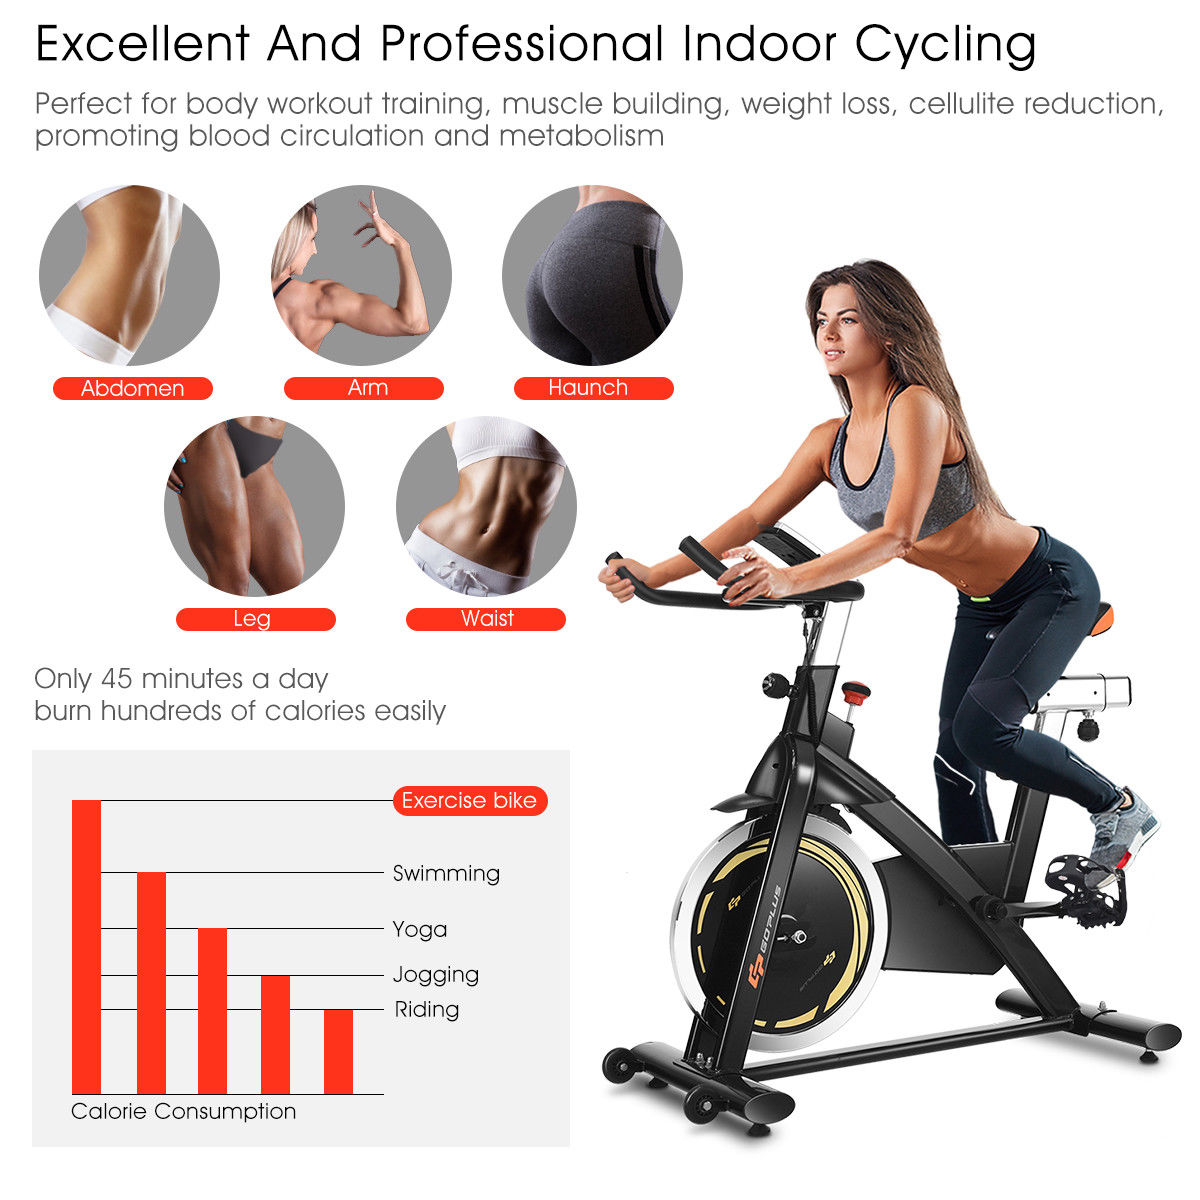 Costway Goplus Exercise Bike Cycle Trainer Indoor Workout Cardio Fitness Bicycle Stationary